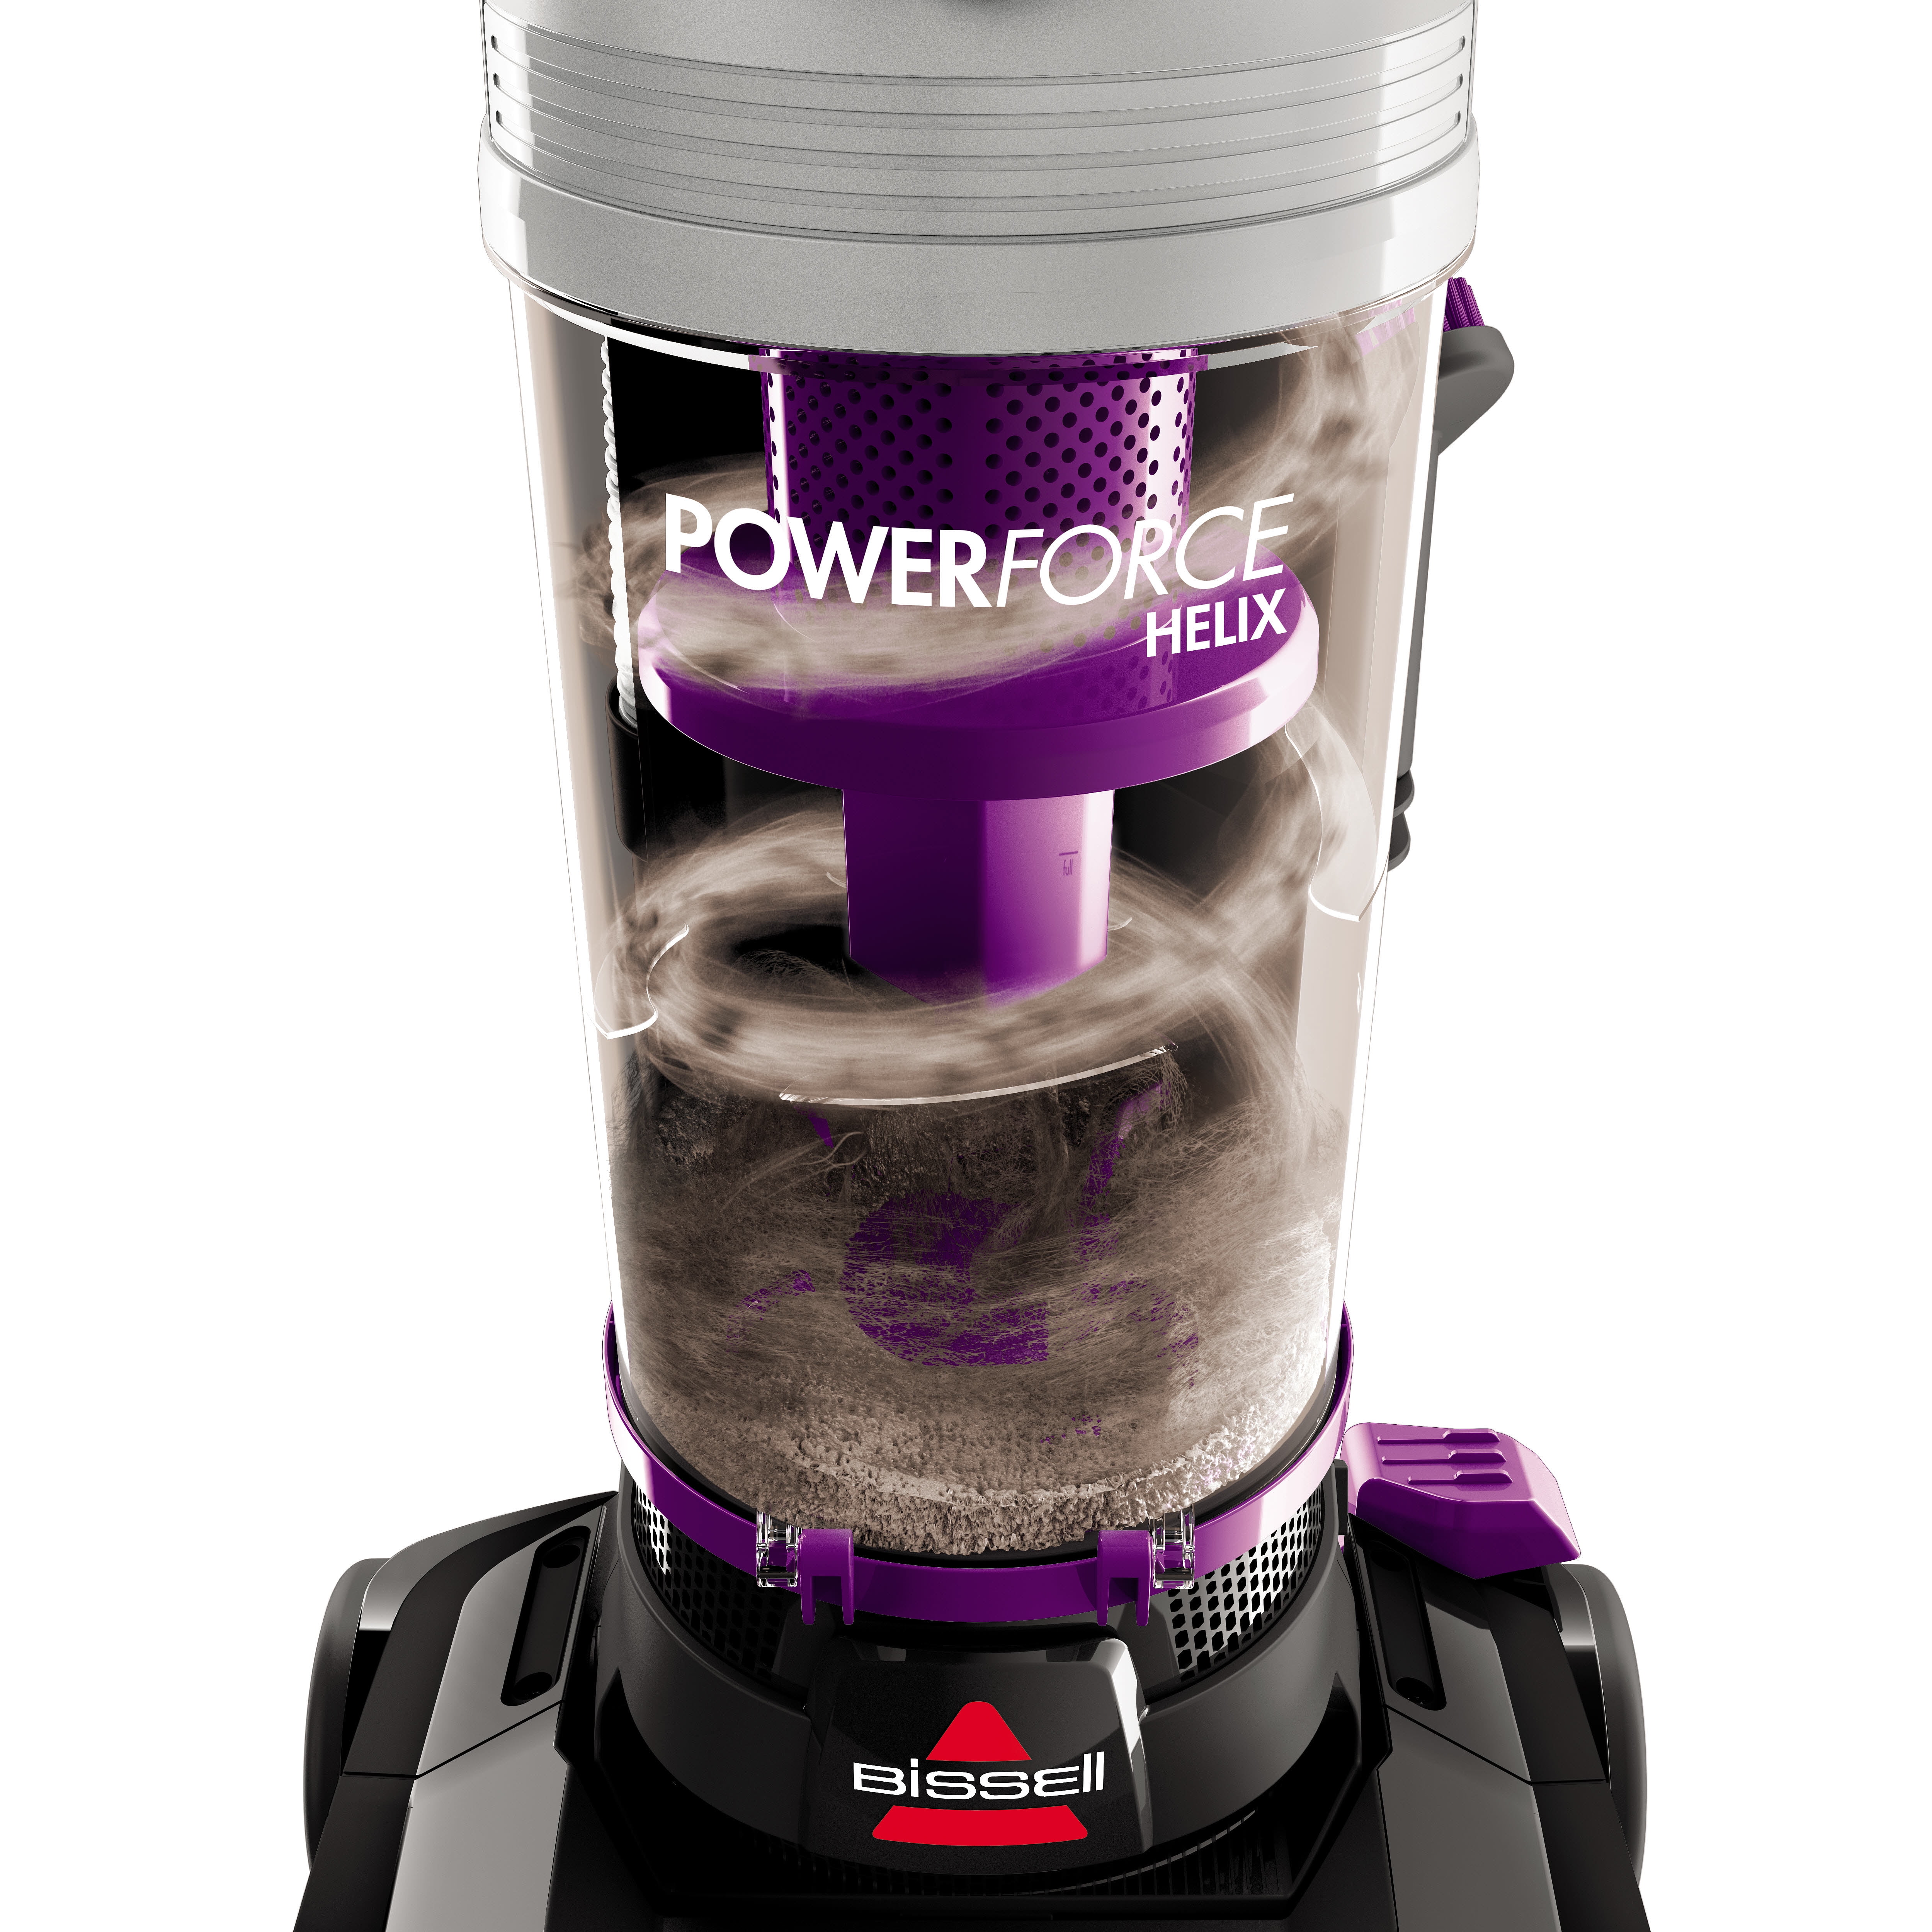 BISSELL Power Force Helix Bagless Upright Vacuum, 2191U - 2